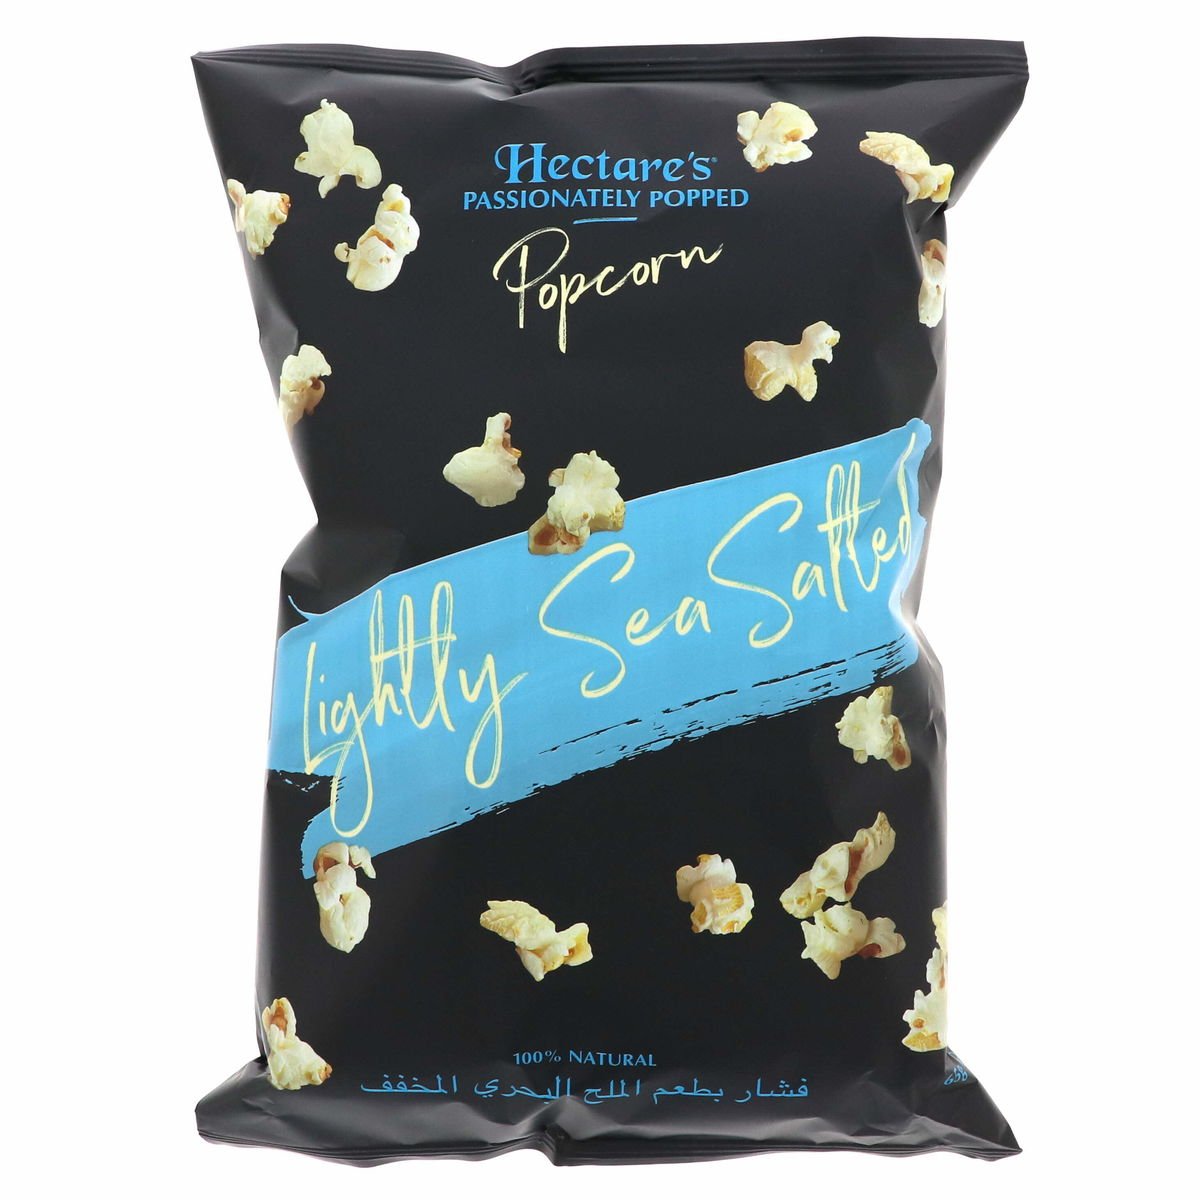 Hectare's Lightly Sea Salted Popcorn 65 g